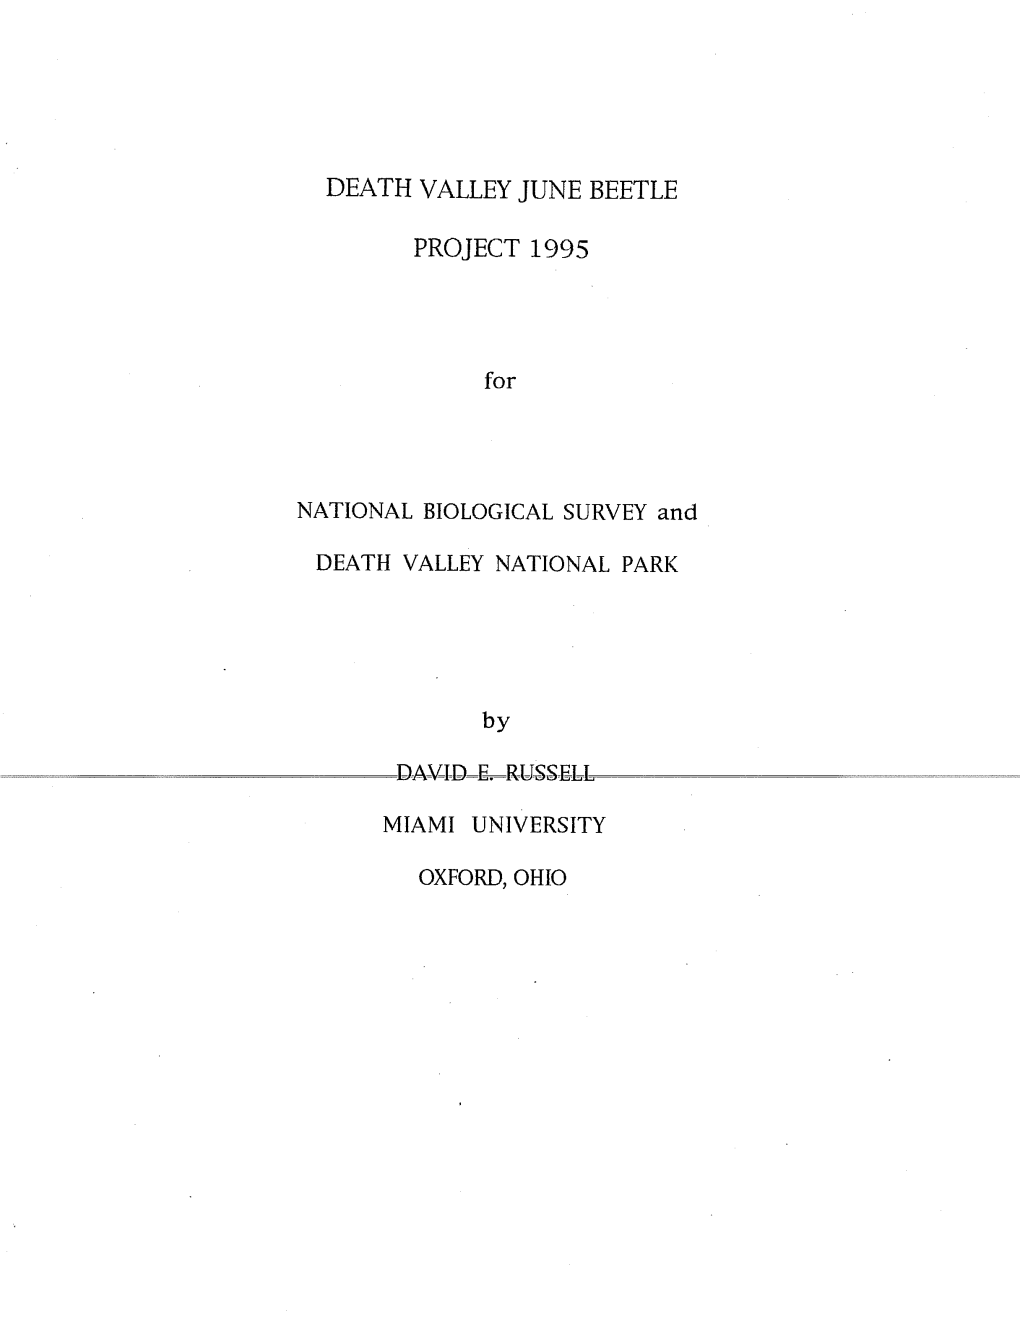 Death Valley June Beetle Project 1995